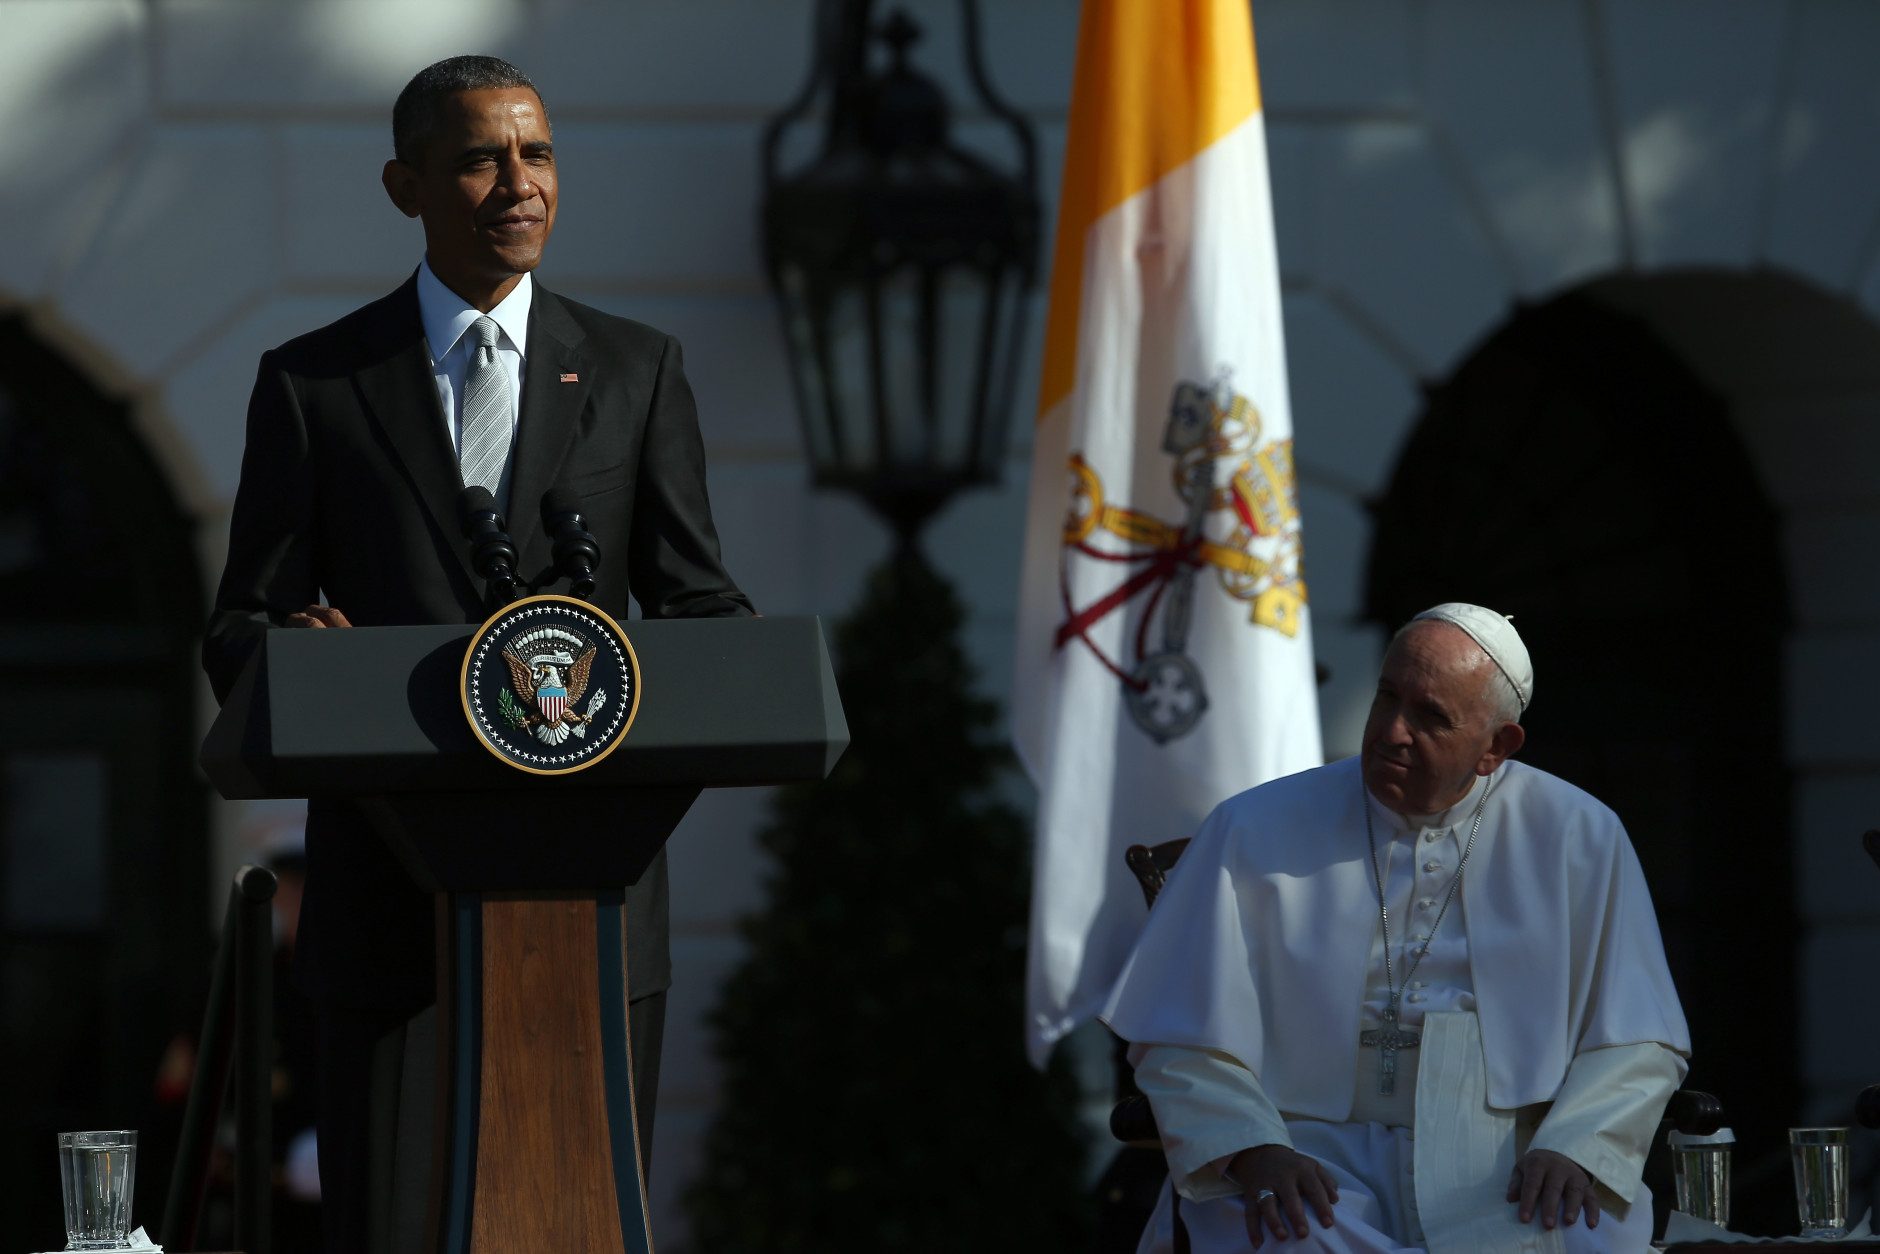 WASHINGTON, DC - SEPTEMBER 23:  U.S. President Barack Obama (L) speaks during the arrival ceremony for Pope Francis (R) at the White House on September 23, 2015 in Washington, DC. The Pope begins his first trip to the United States at the White House followed by a visit to St. Matthew's Cathedral, and will then hold a Mass on the grounds of the Basilica of the National Shrine of the Immaculate Conception.  (Photo by Win McNamee/Getty Images)